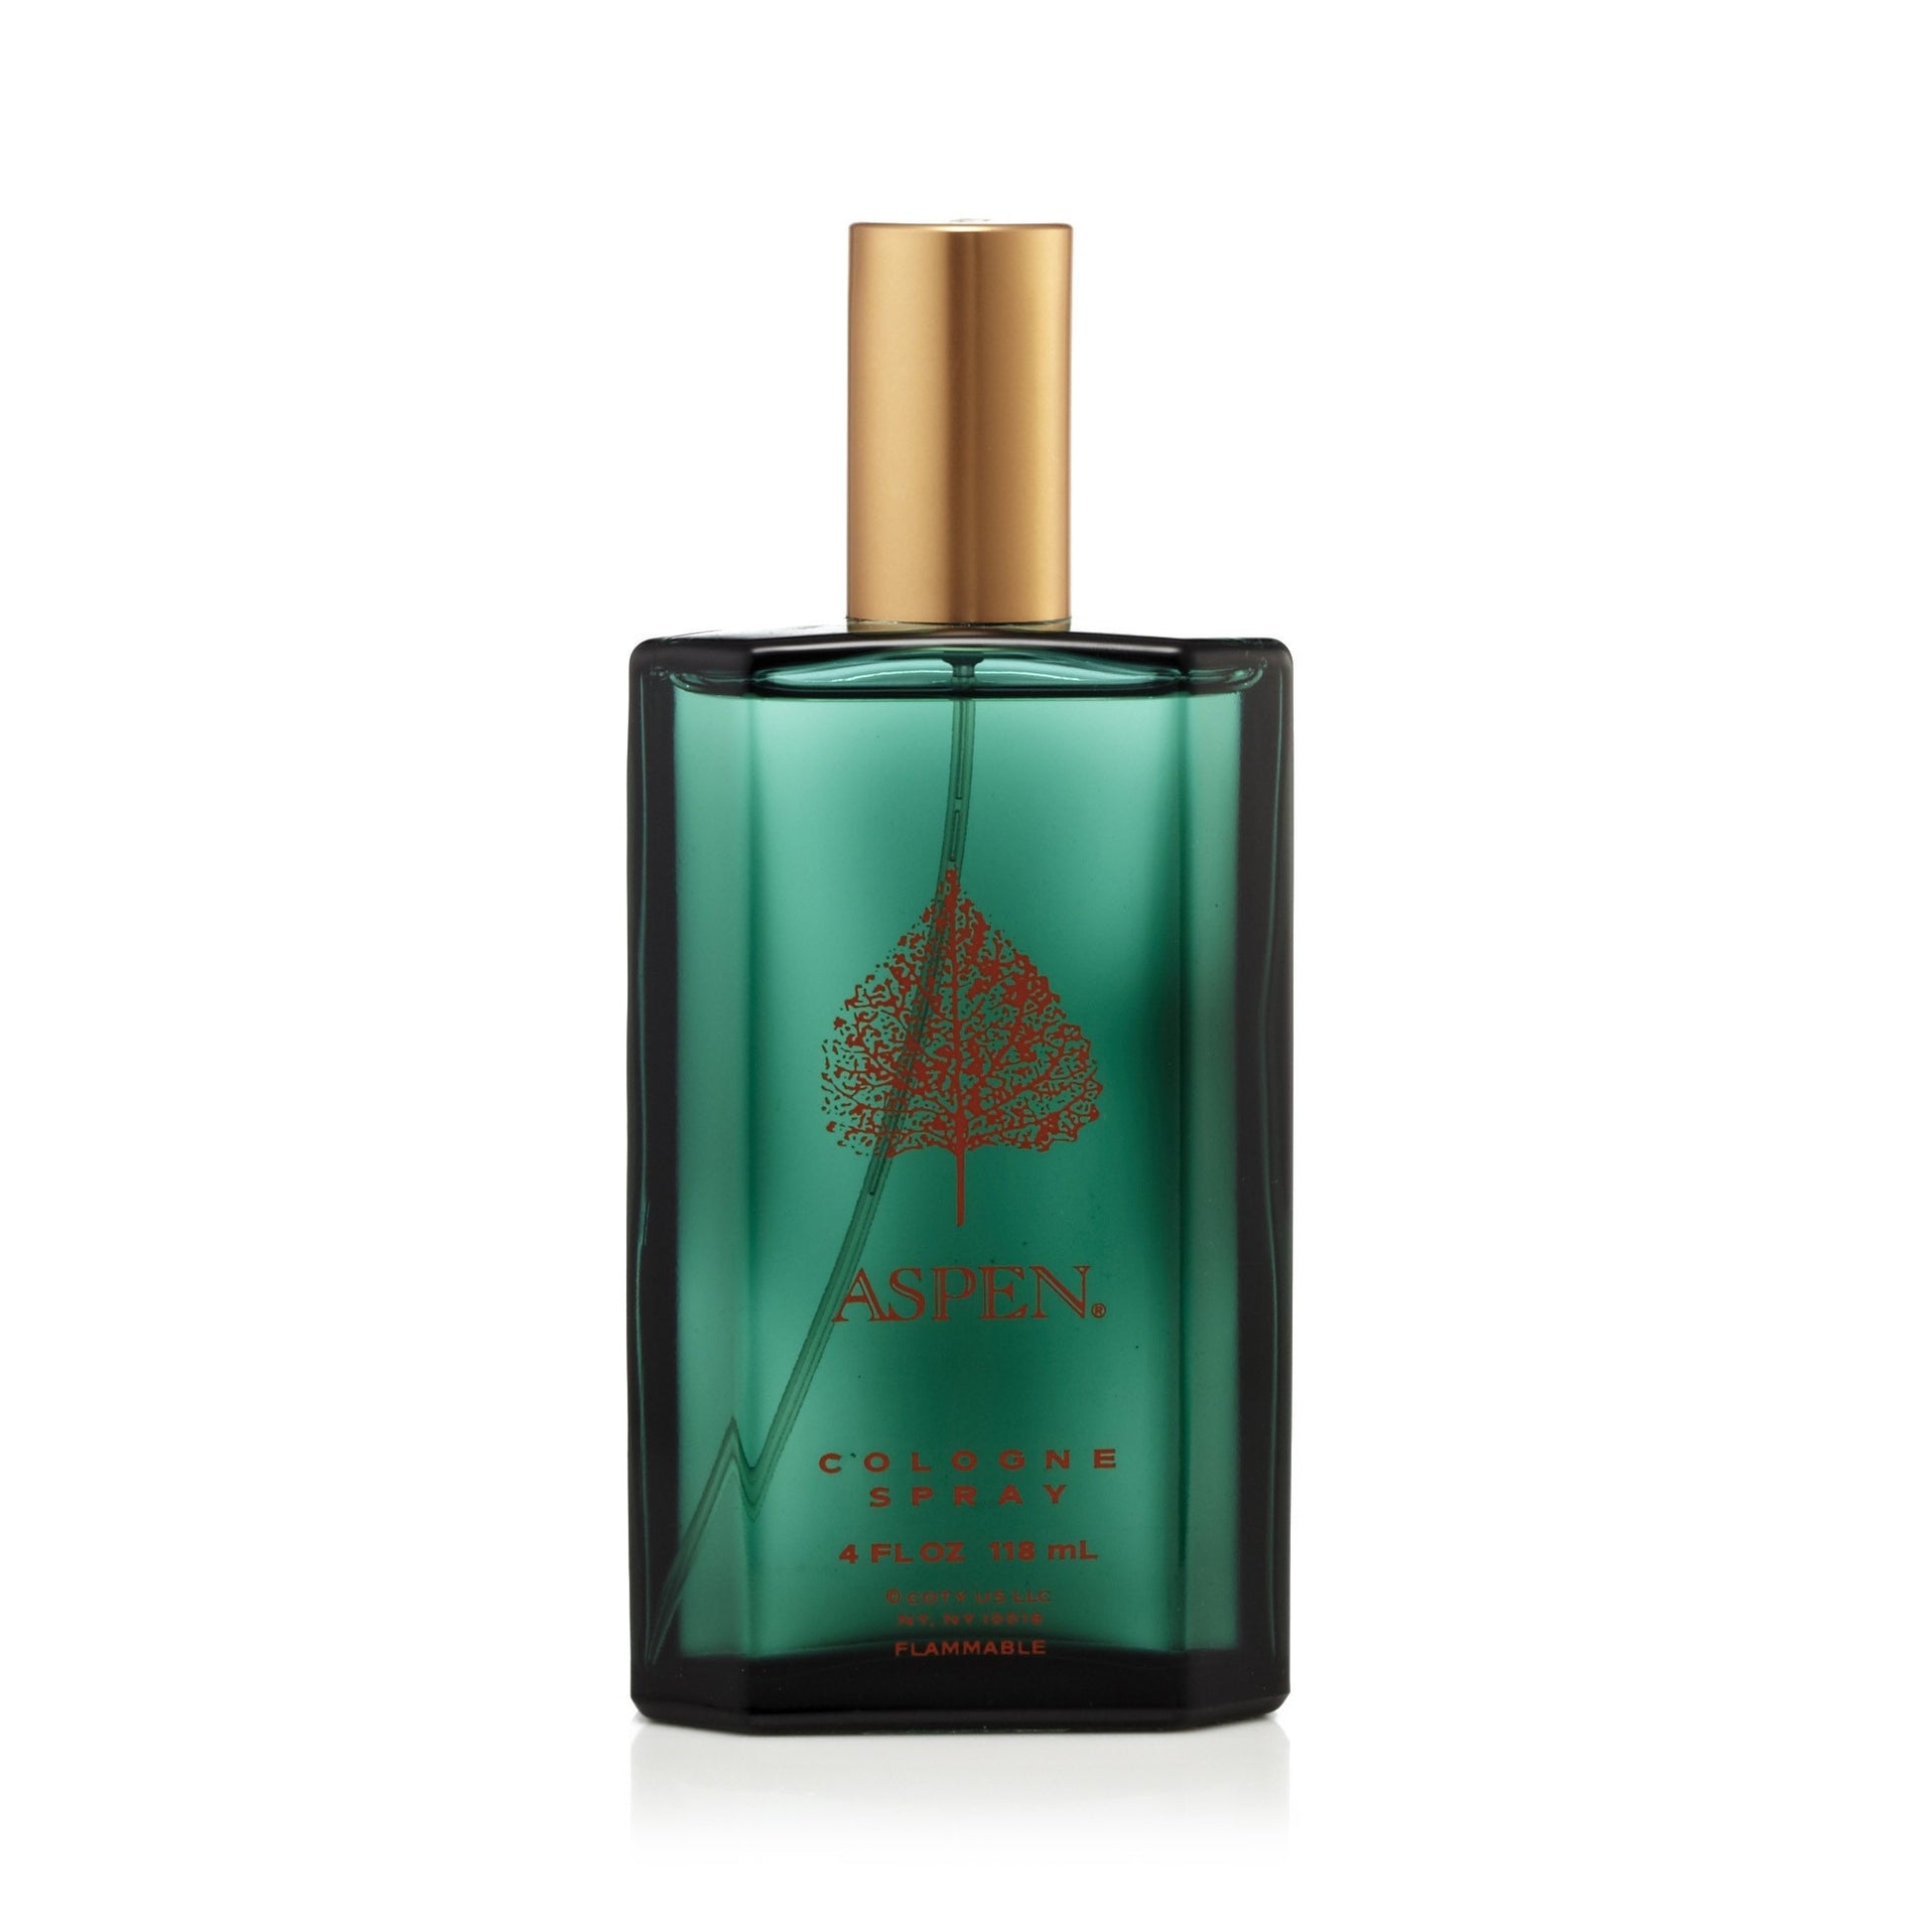 Aspen Cologne Spray for Men by Coty Click to open in modal